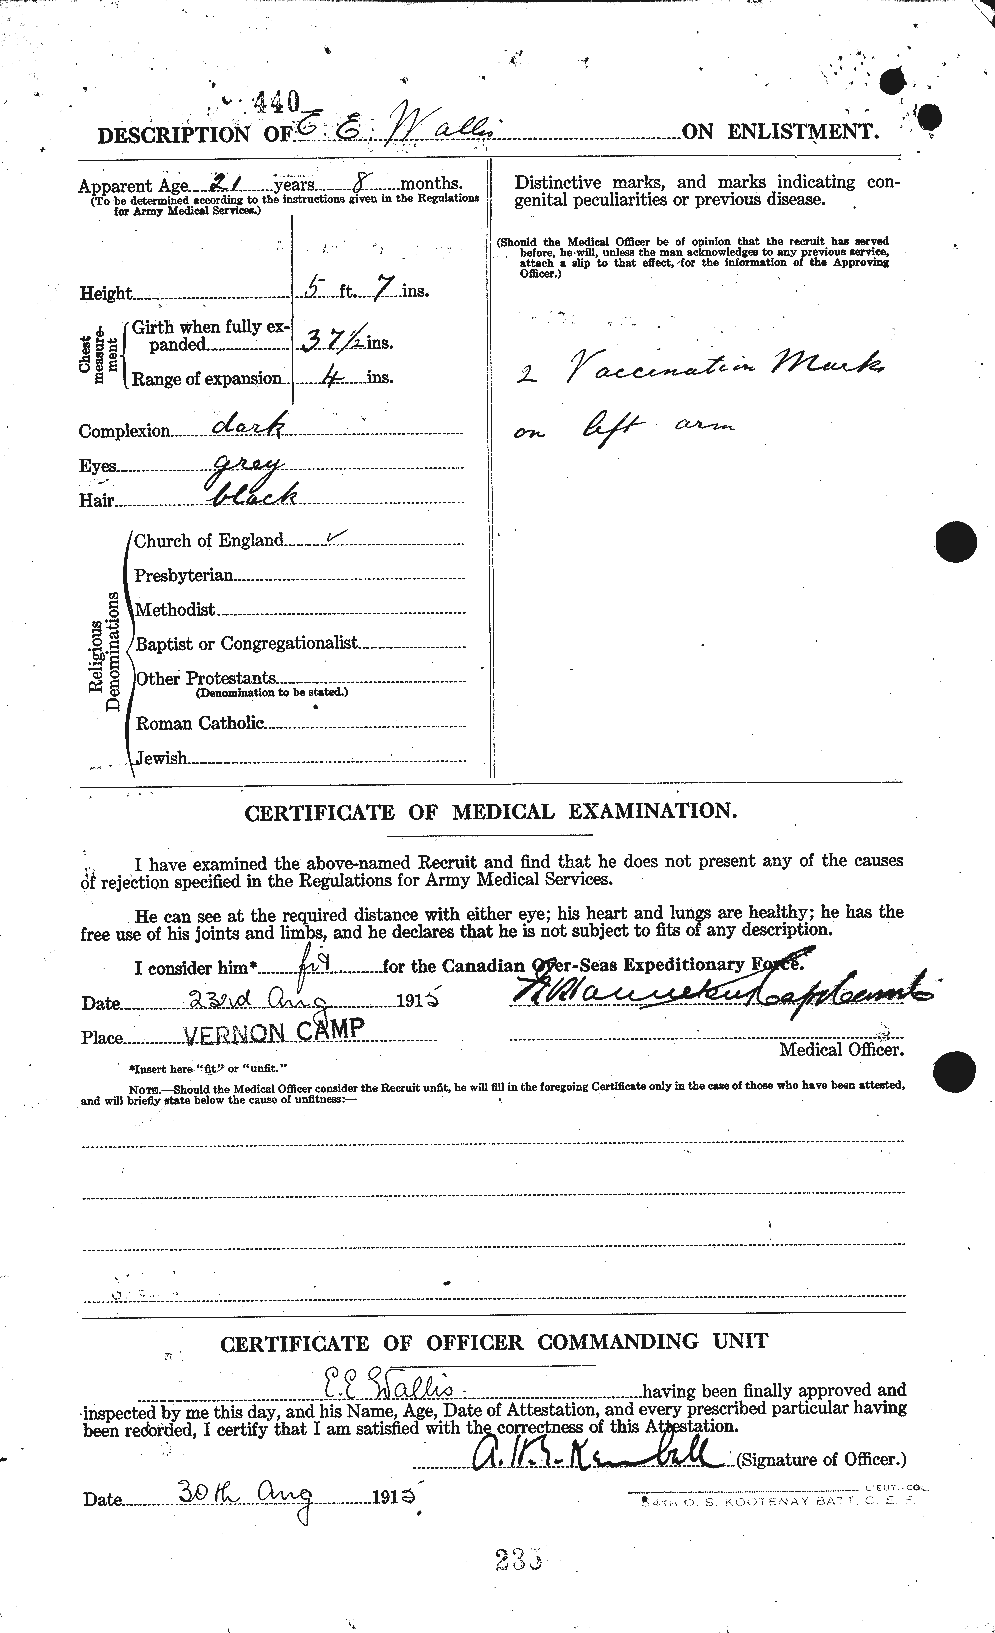 Personnel Records of the First World War - CEF 660977b